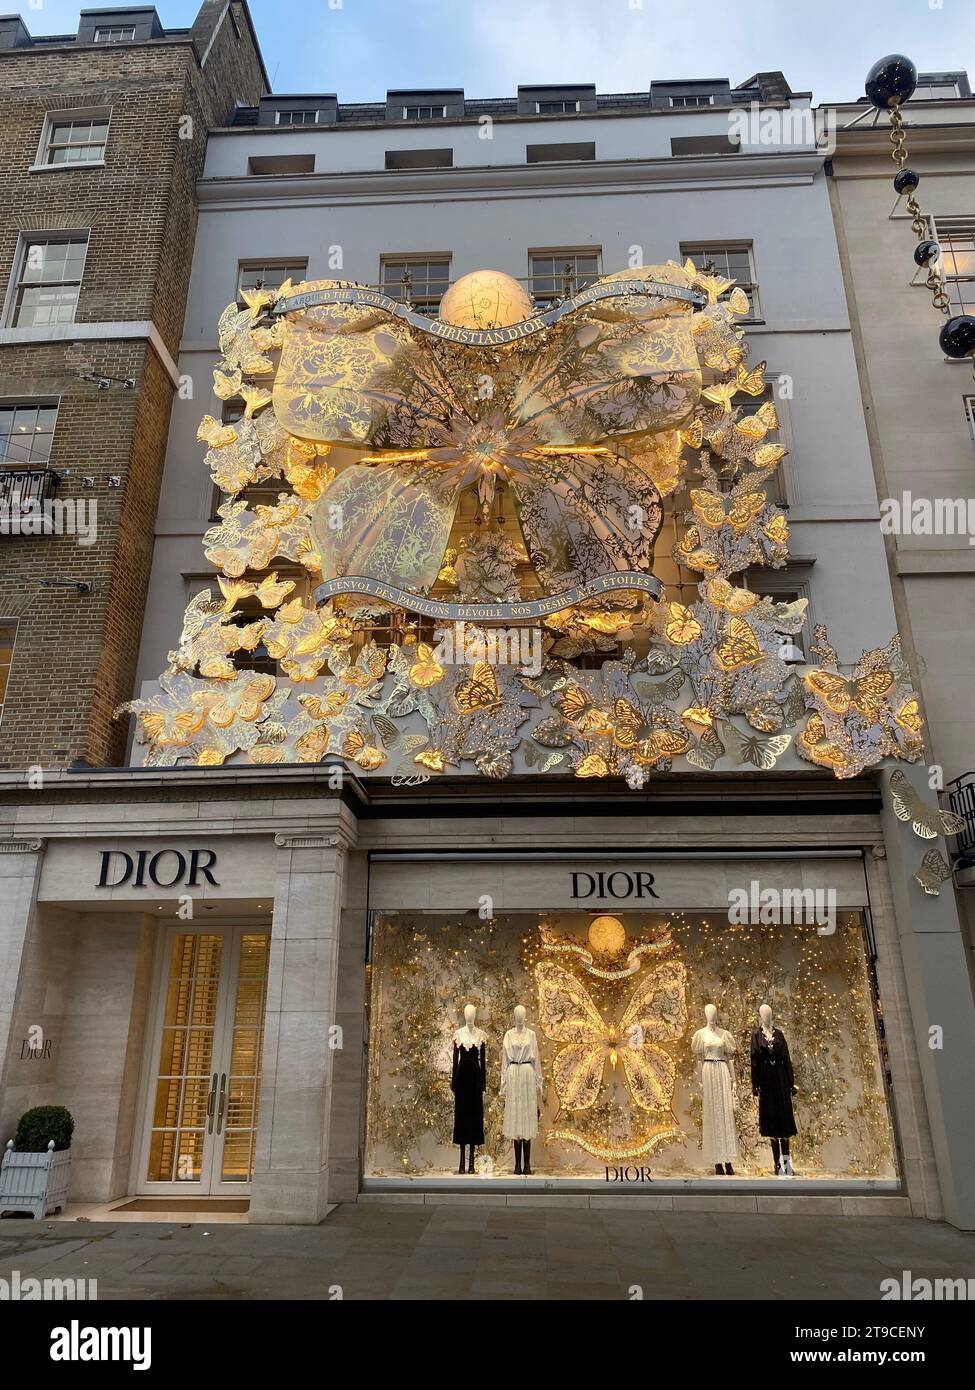 Outside the brand's flagship store stands a five meter Nordmann Fir tree decorated with hand painted bear baubles .Visitors are welcome to donate to The Royal Marsden Cancer Charity and dedicate a personalised star to be featured on the Ralph Lauren Giving Tree .. Stock Photo